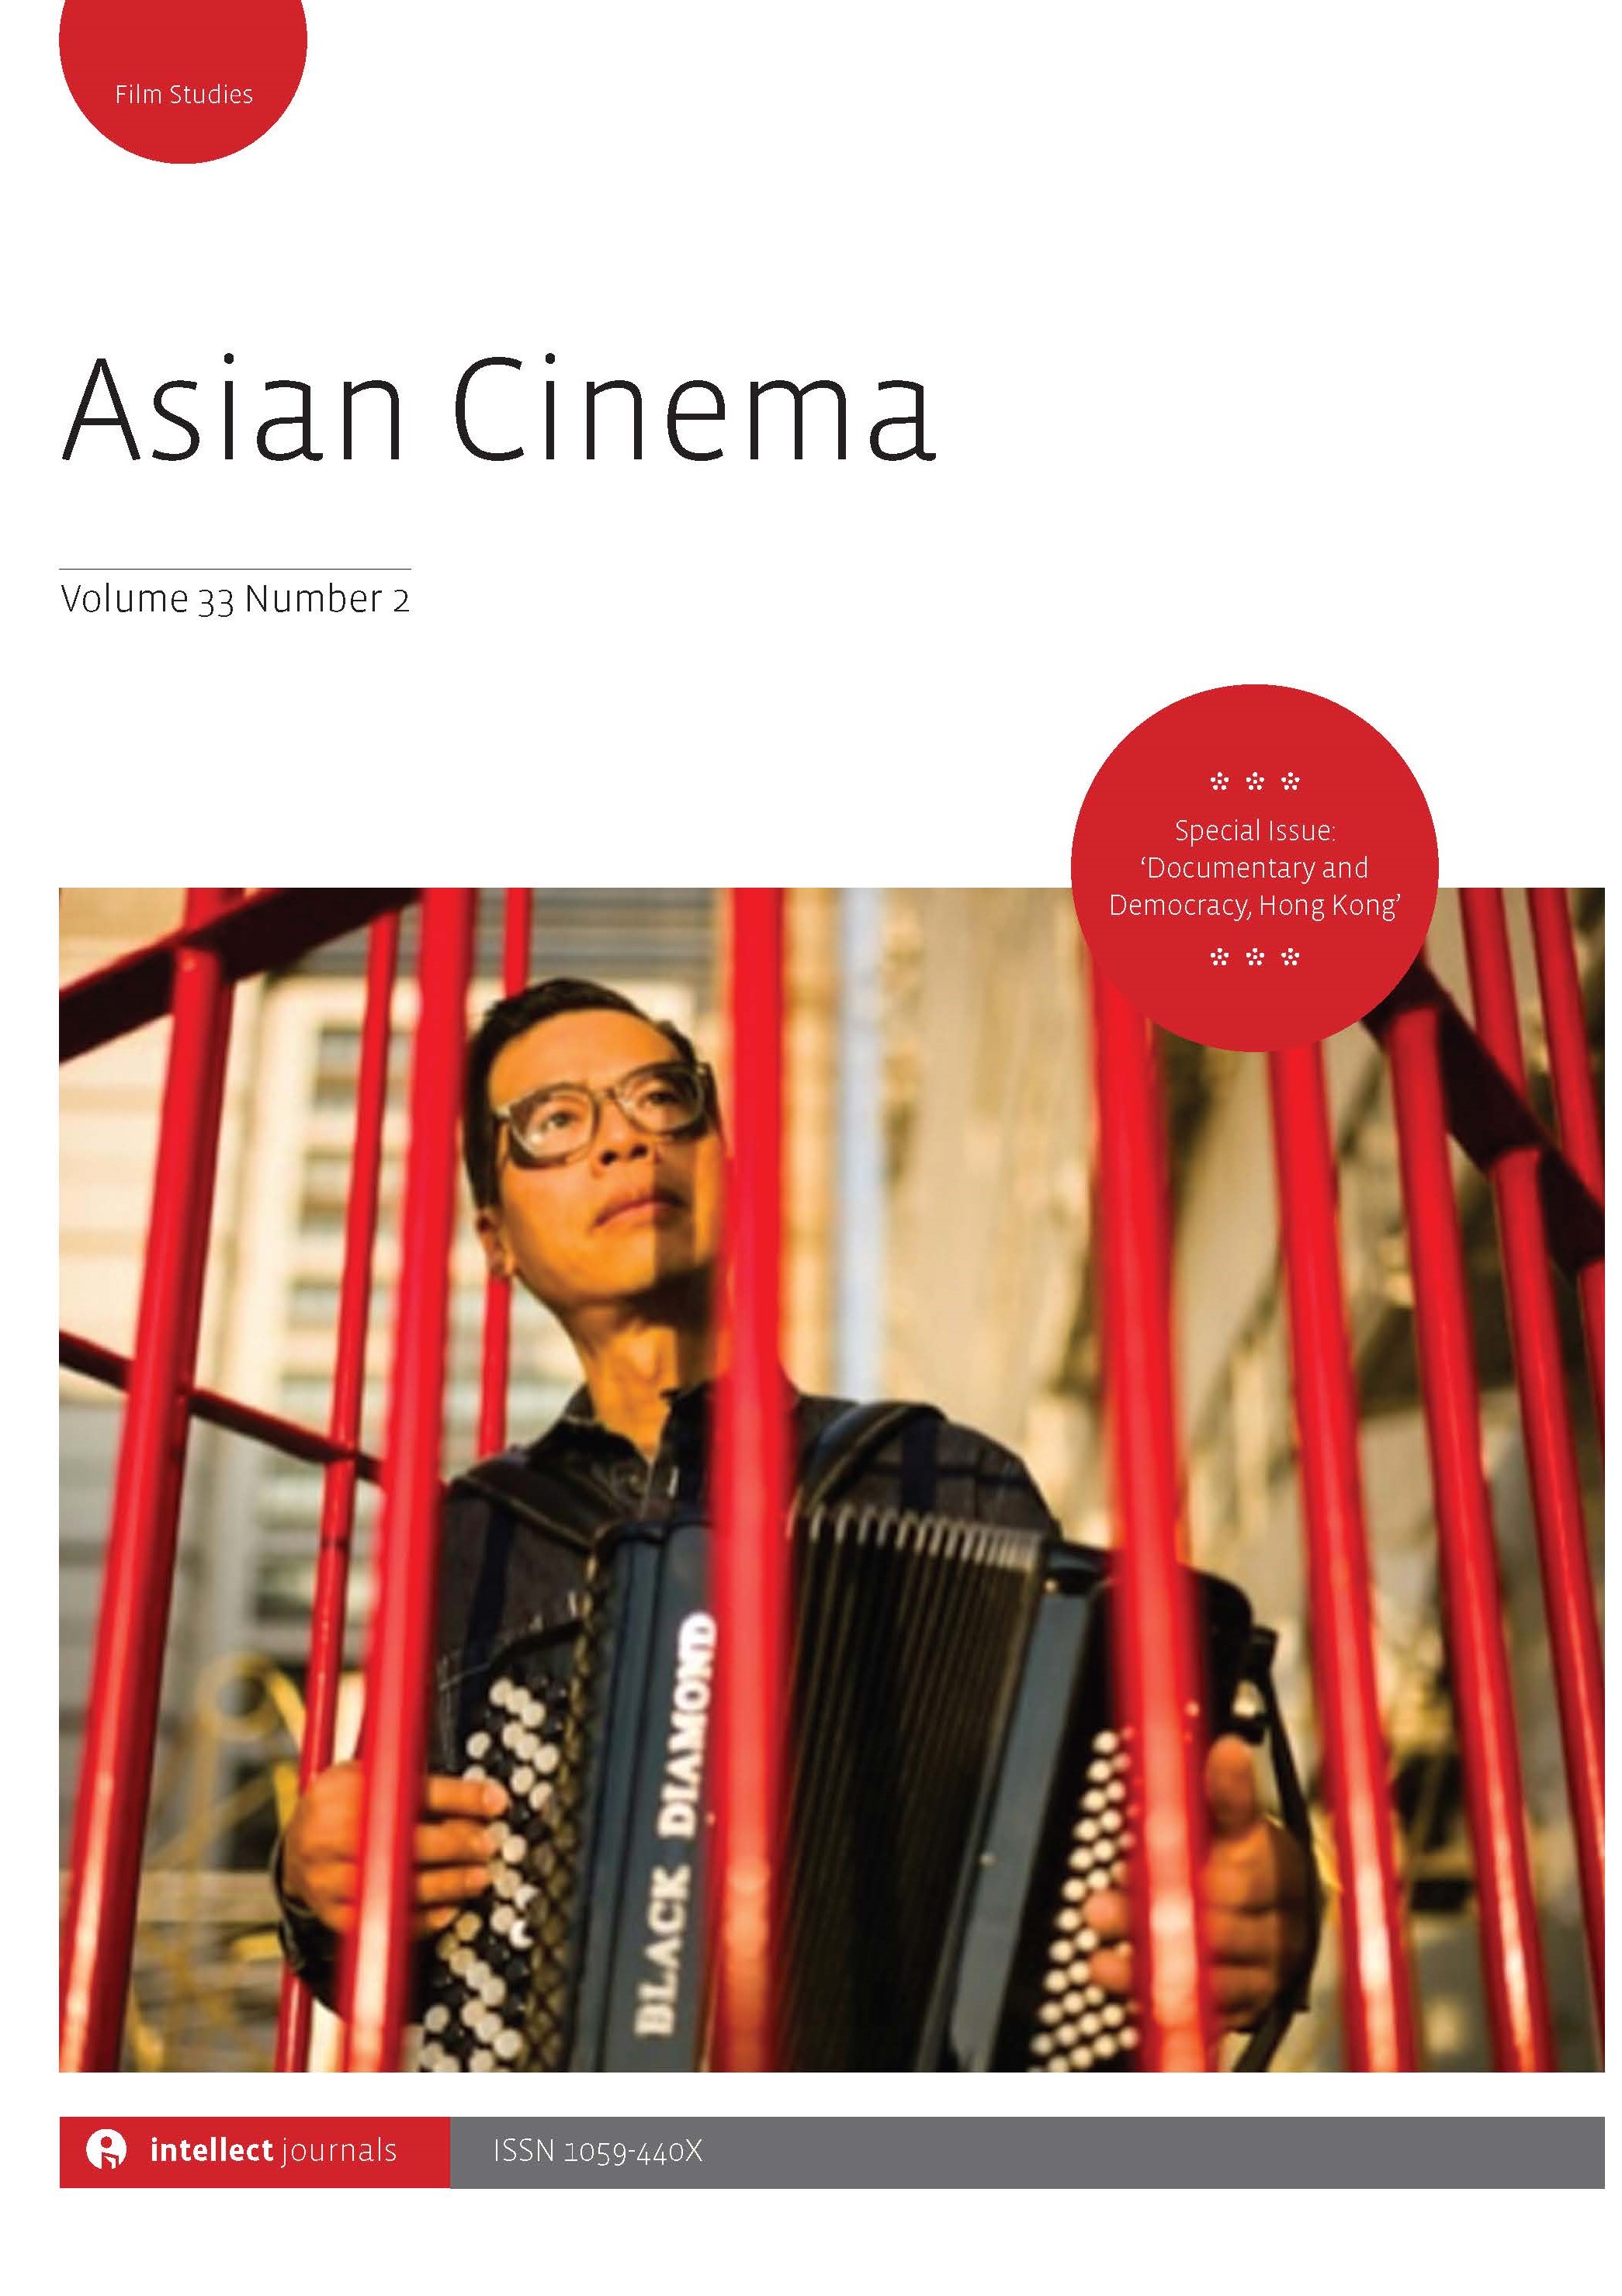 Asian Cinema 33.2 is out now! Special Issue